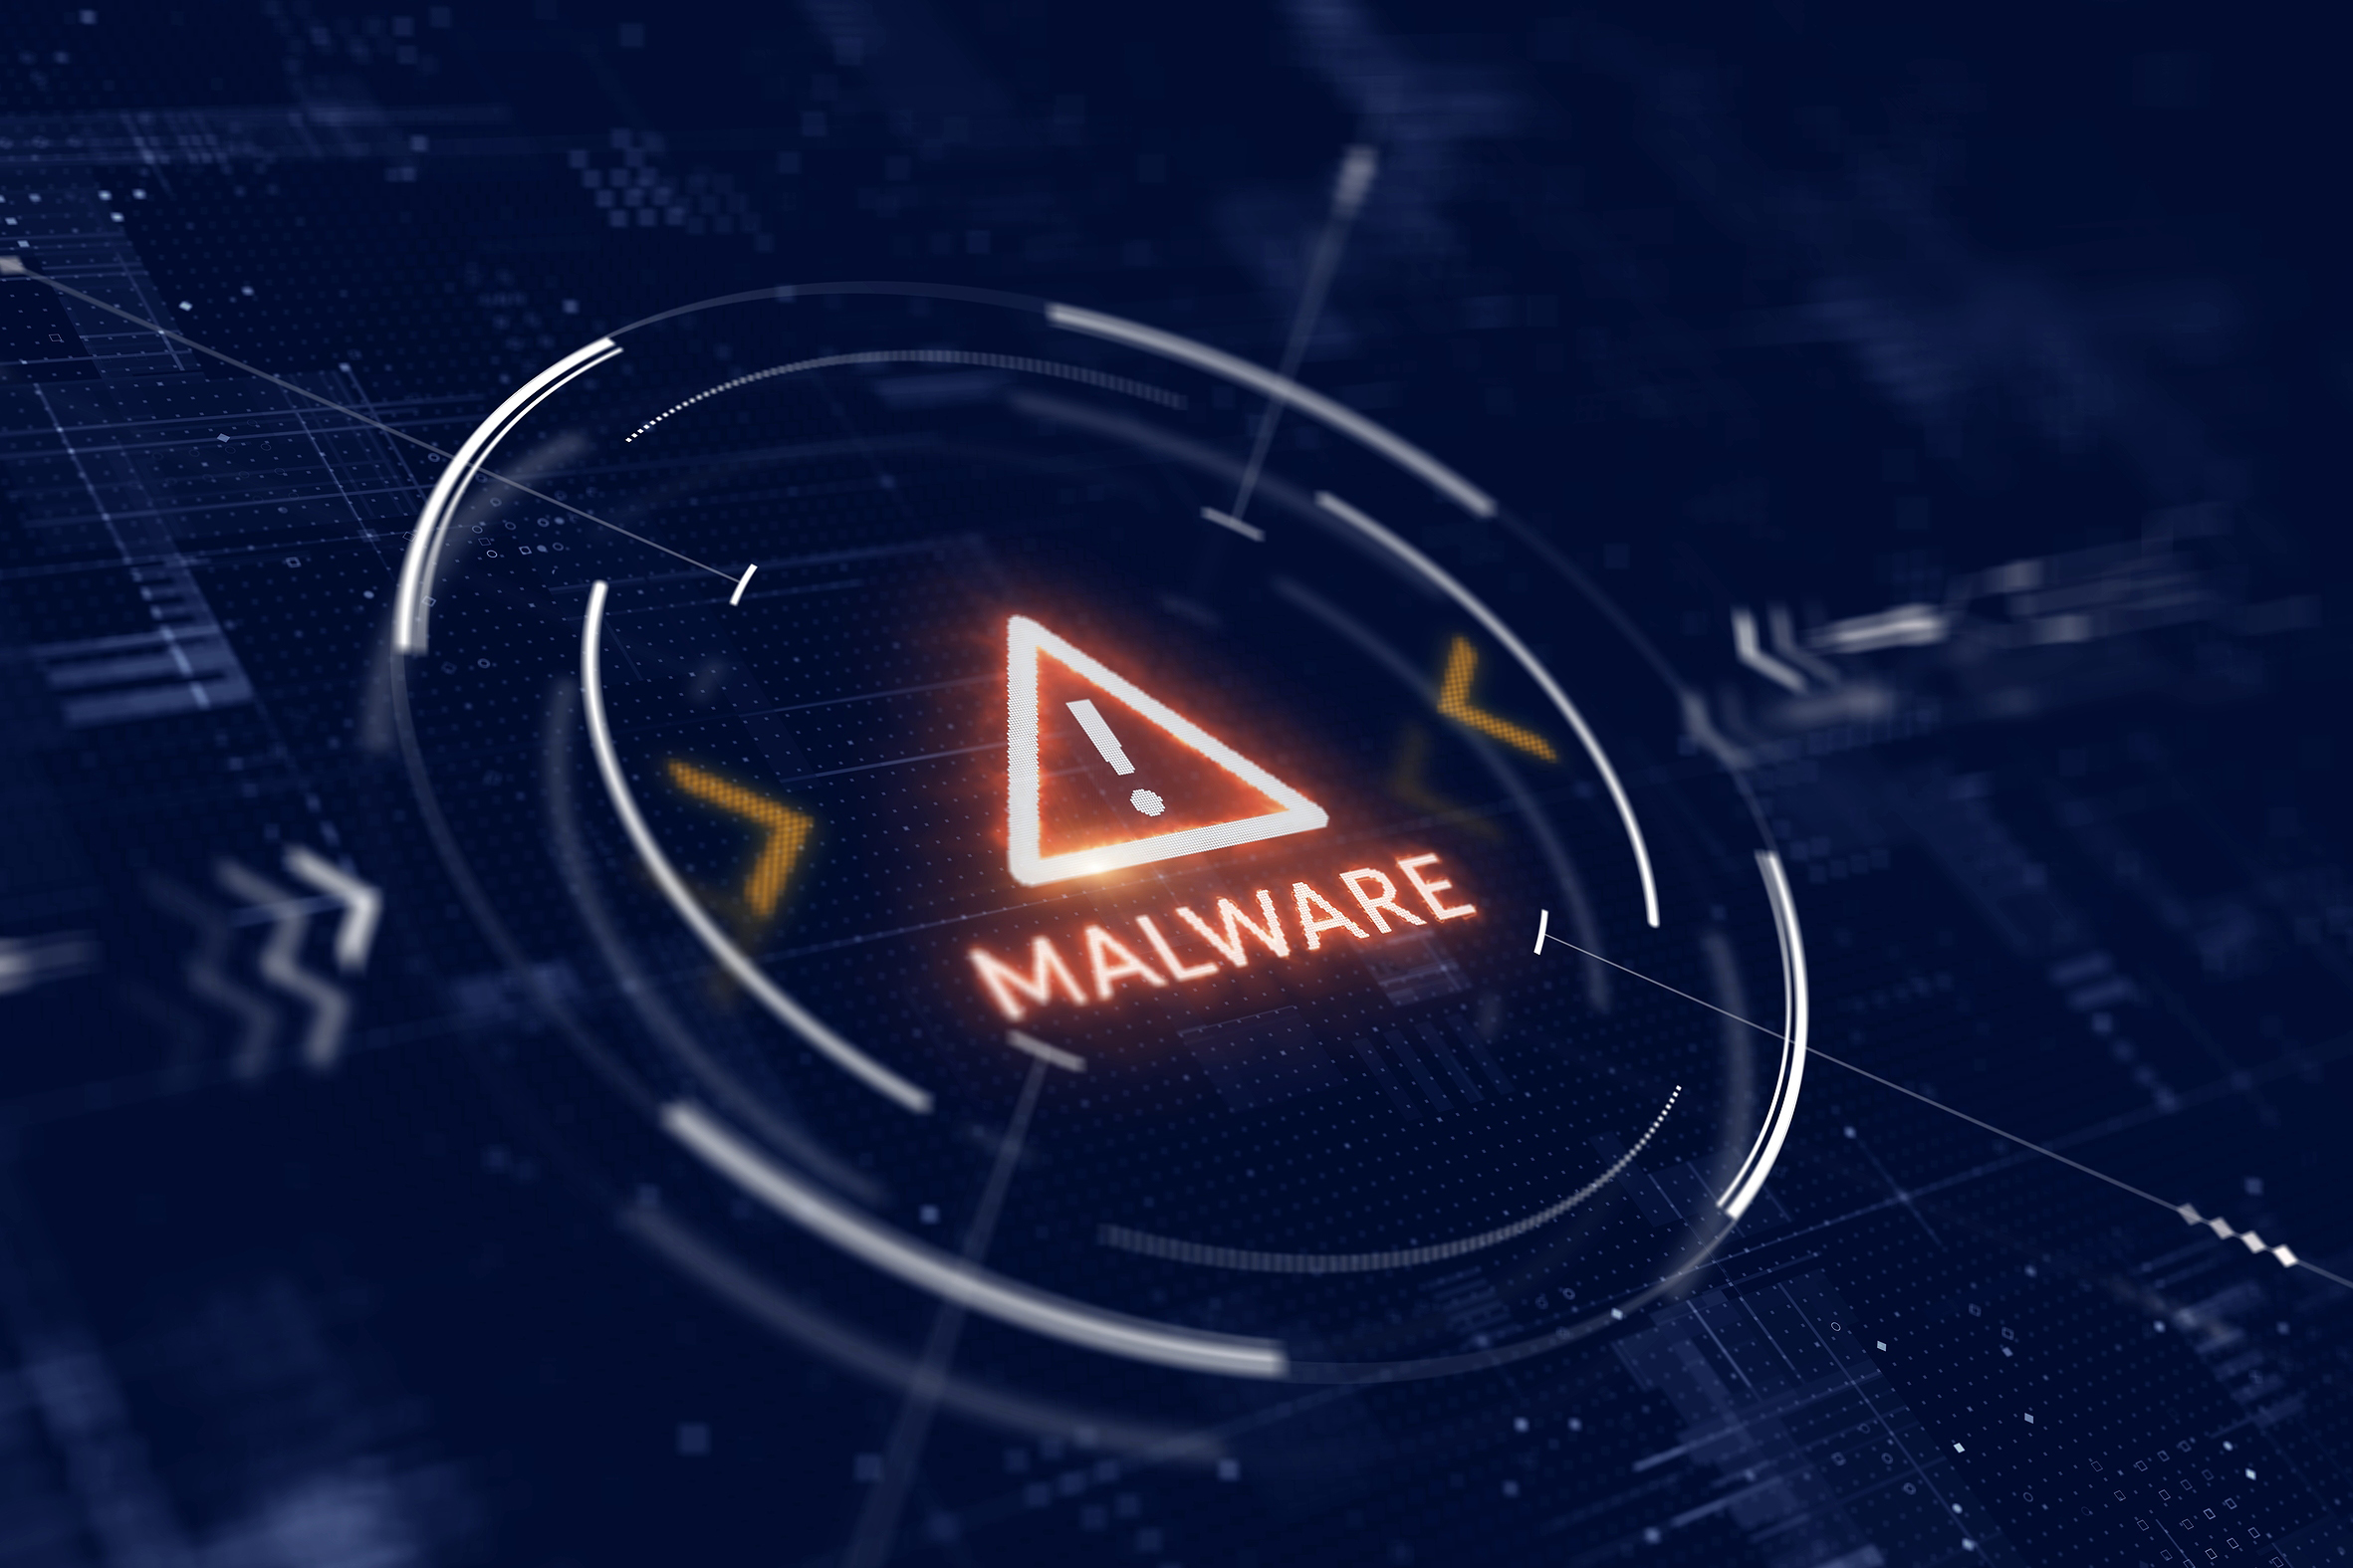 icon image that indicates malware has been detected